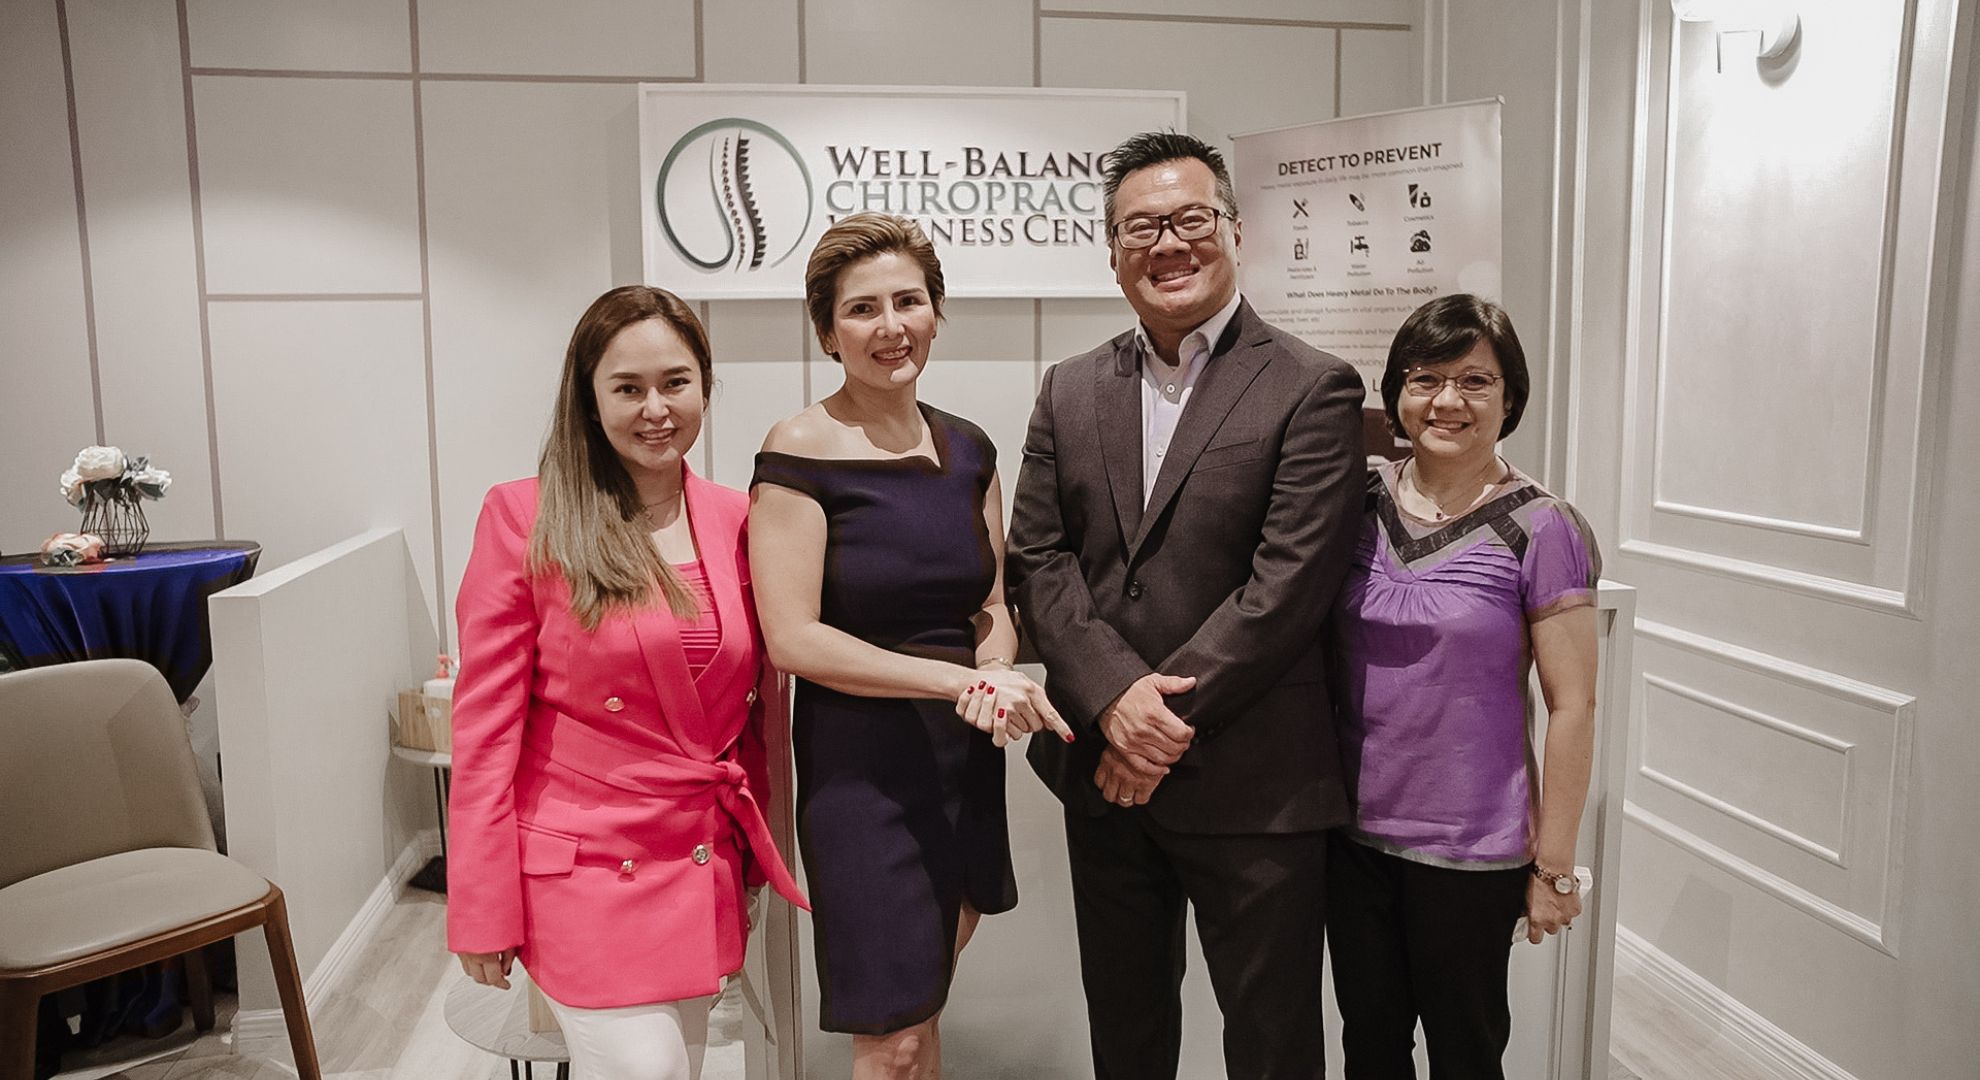 Vital Dome Expands Local Network with BGC Chiropractic Clinic